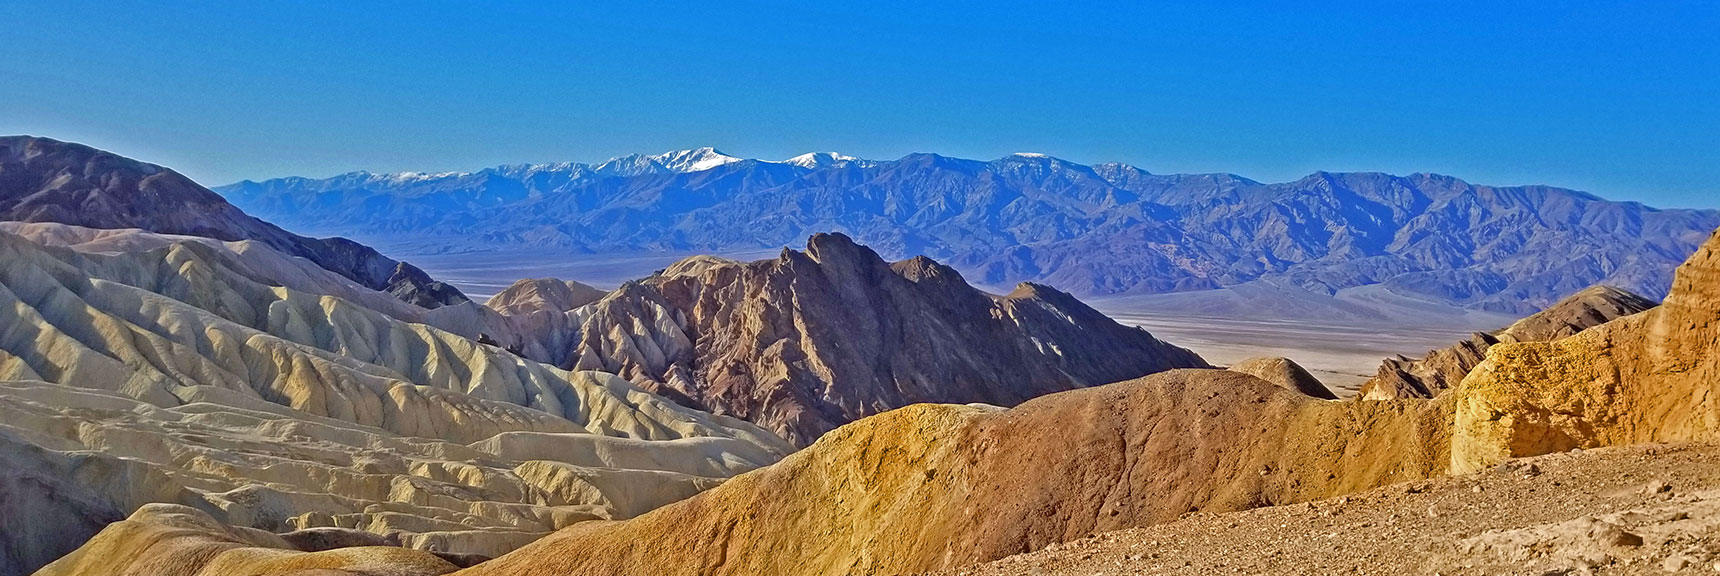 Telescope, Bennett, Rogers and Wildrose Peaks in Panamint Range from Above Red Cathedral. | Golden Canyon to Zabriskie Point | Death Valley National Park, California